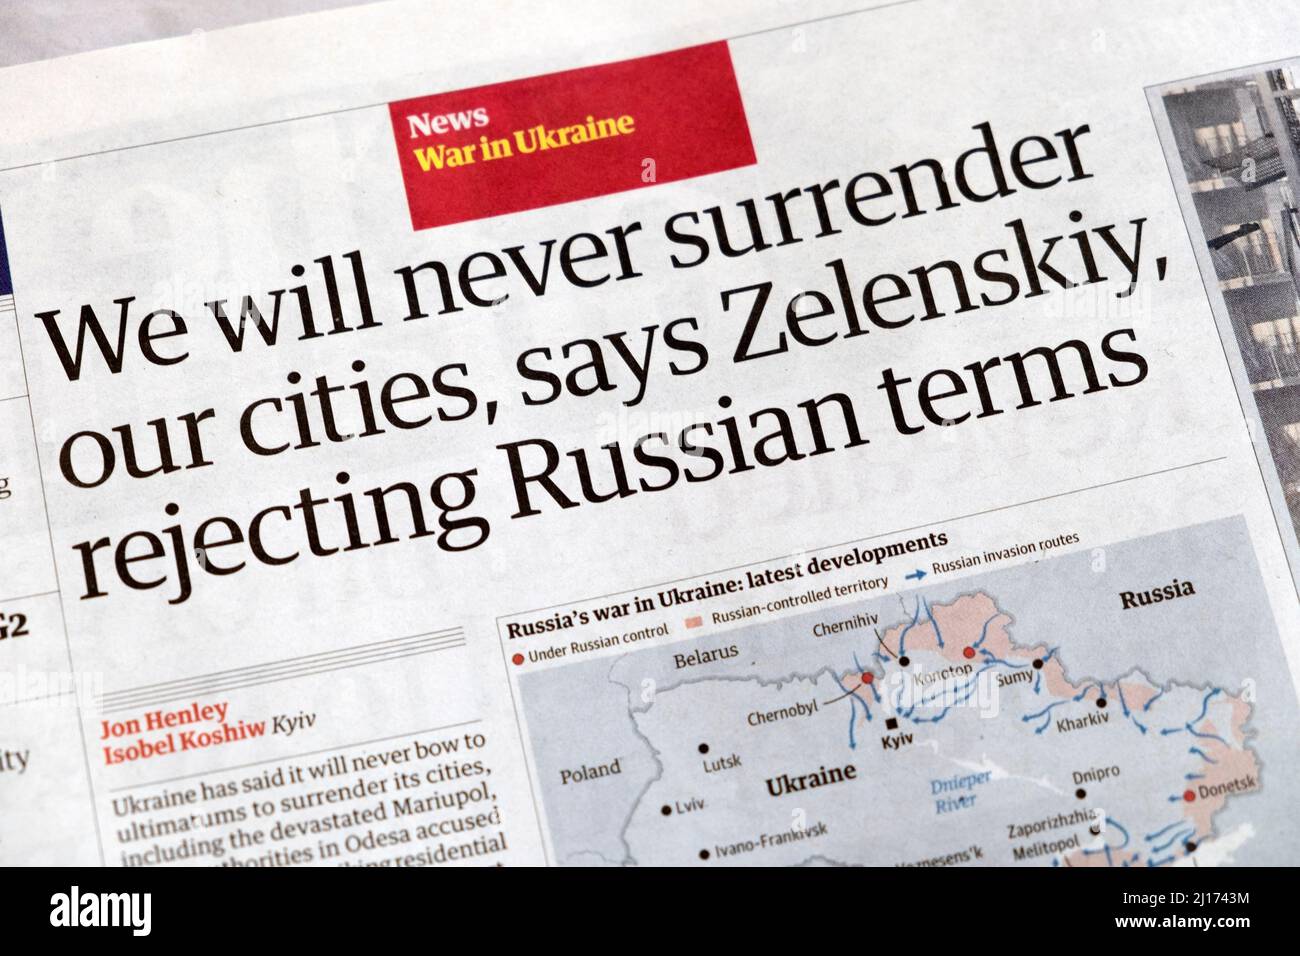 'We will never surrender our cities says Zelenskiy rejecting Russian terms' Guardian newspaper headline Russian invasion Ukraine war 21 March 2022 UK Stock Photo